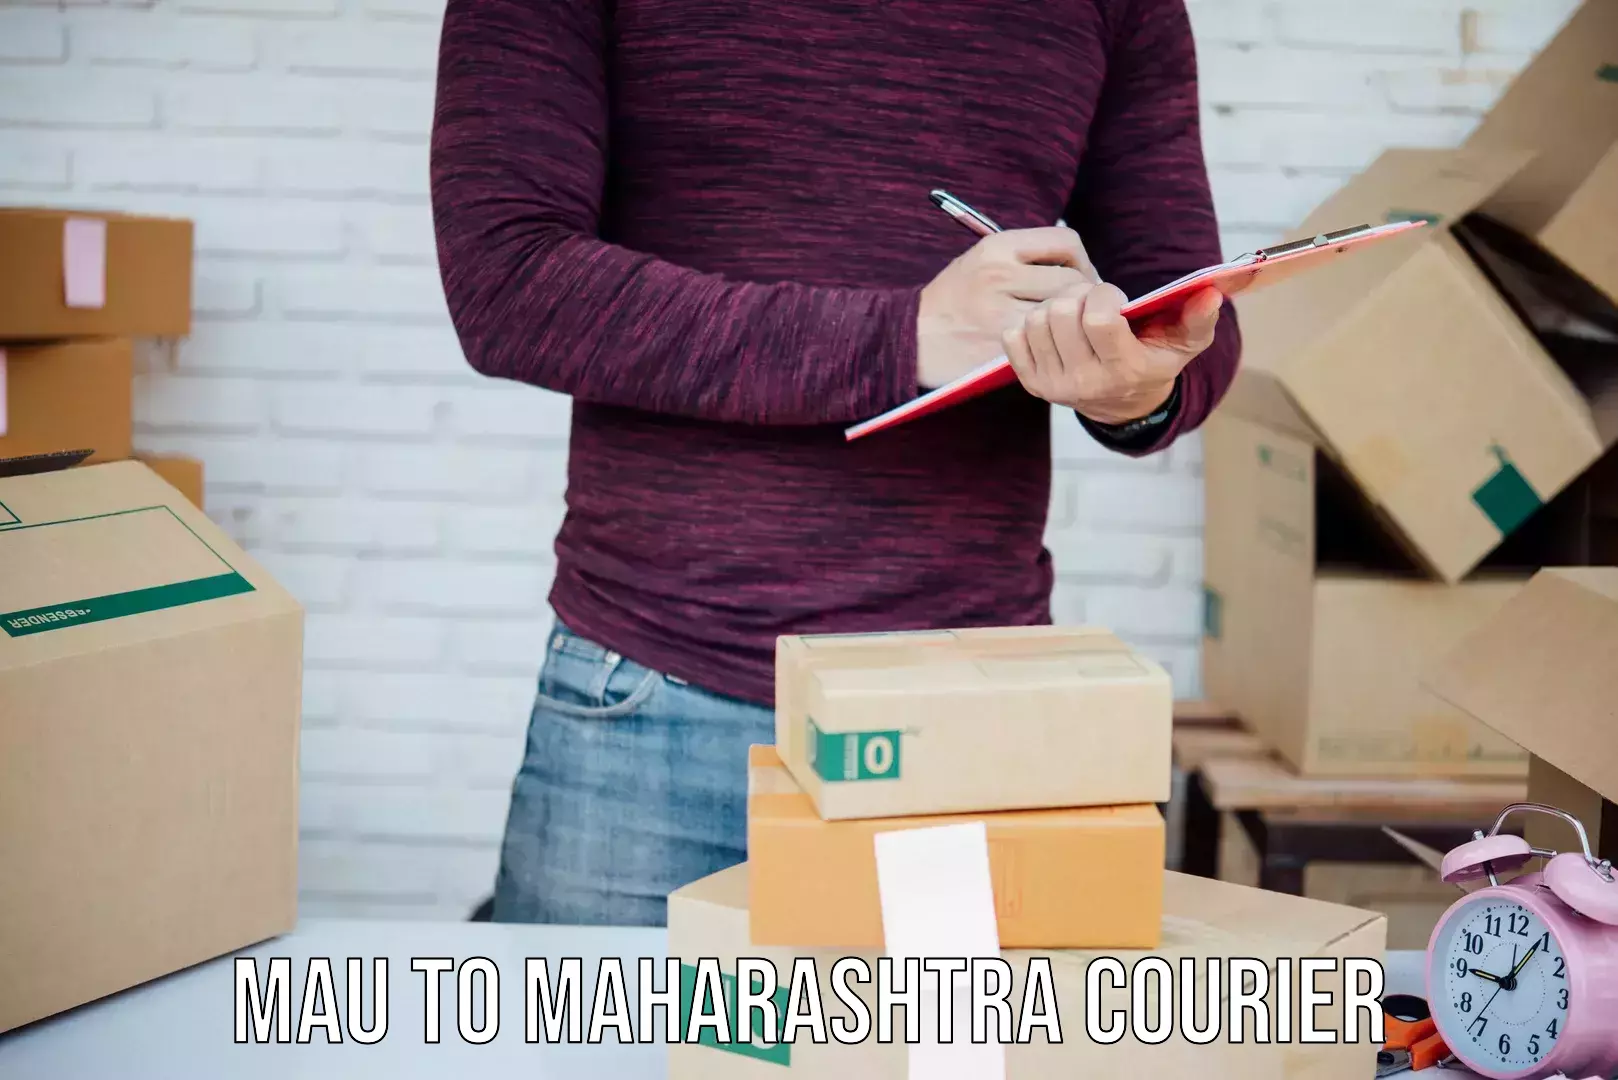 Full-service courier options Mau to Oras